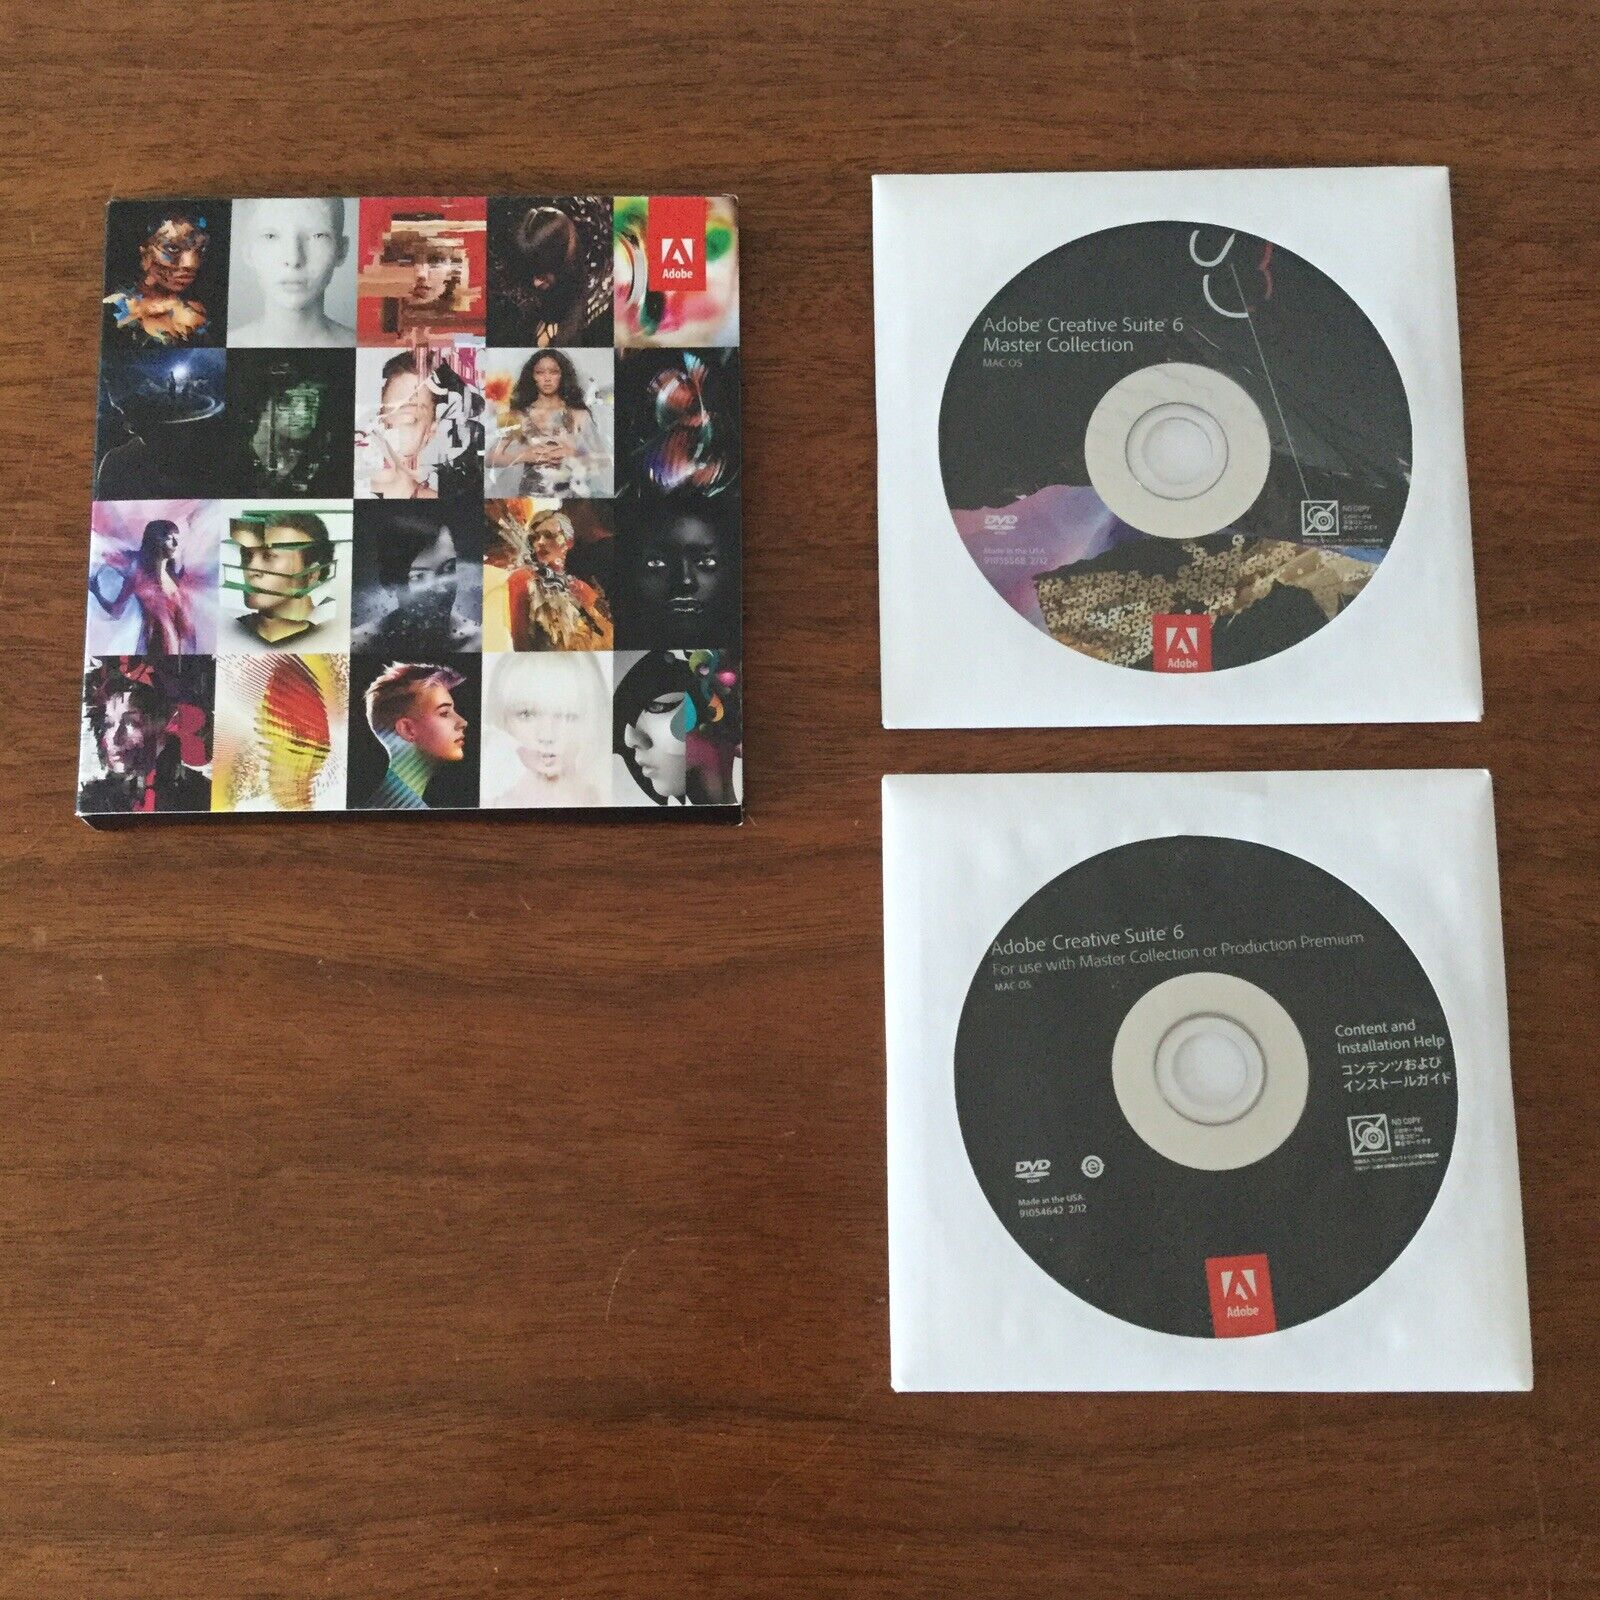 Adobe CS6 Master Collection for Mac - Discs and Serial Number